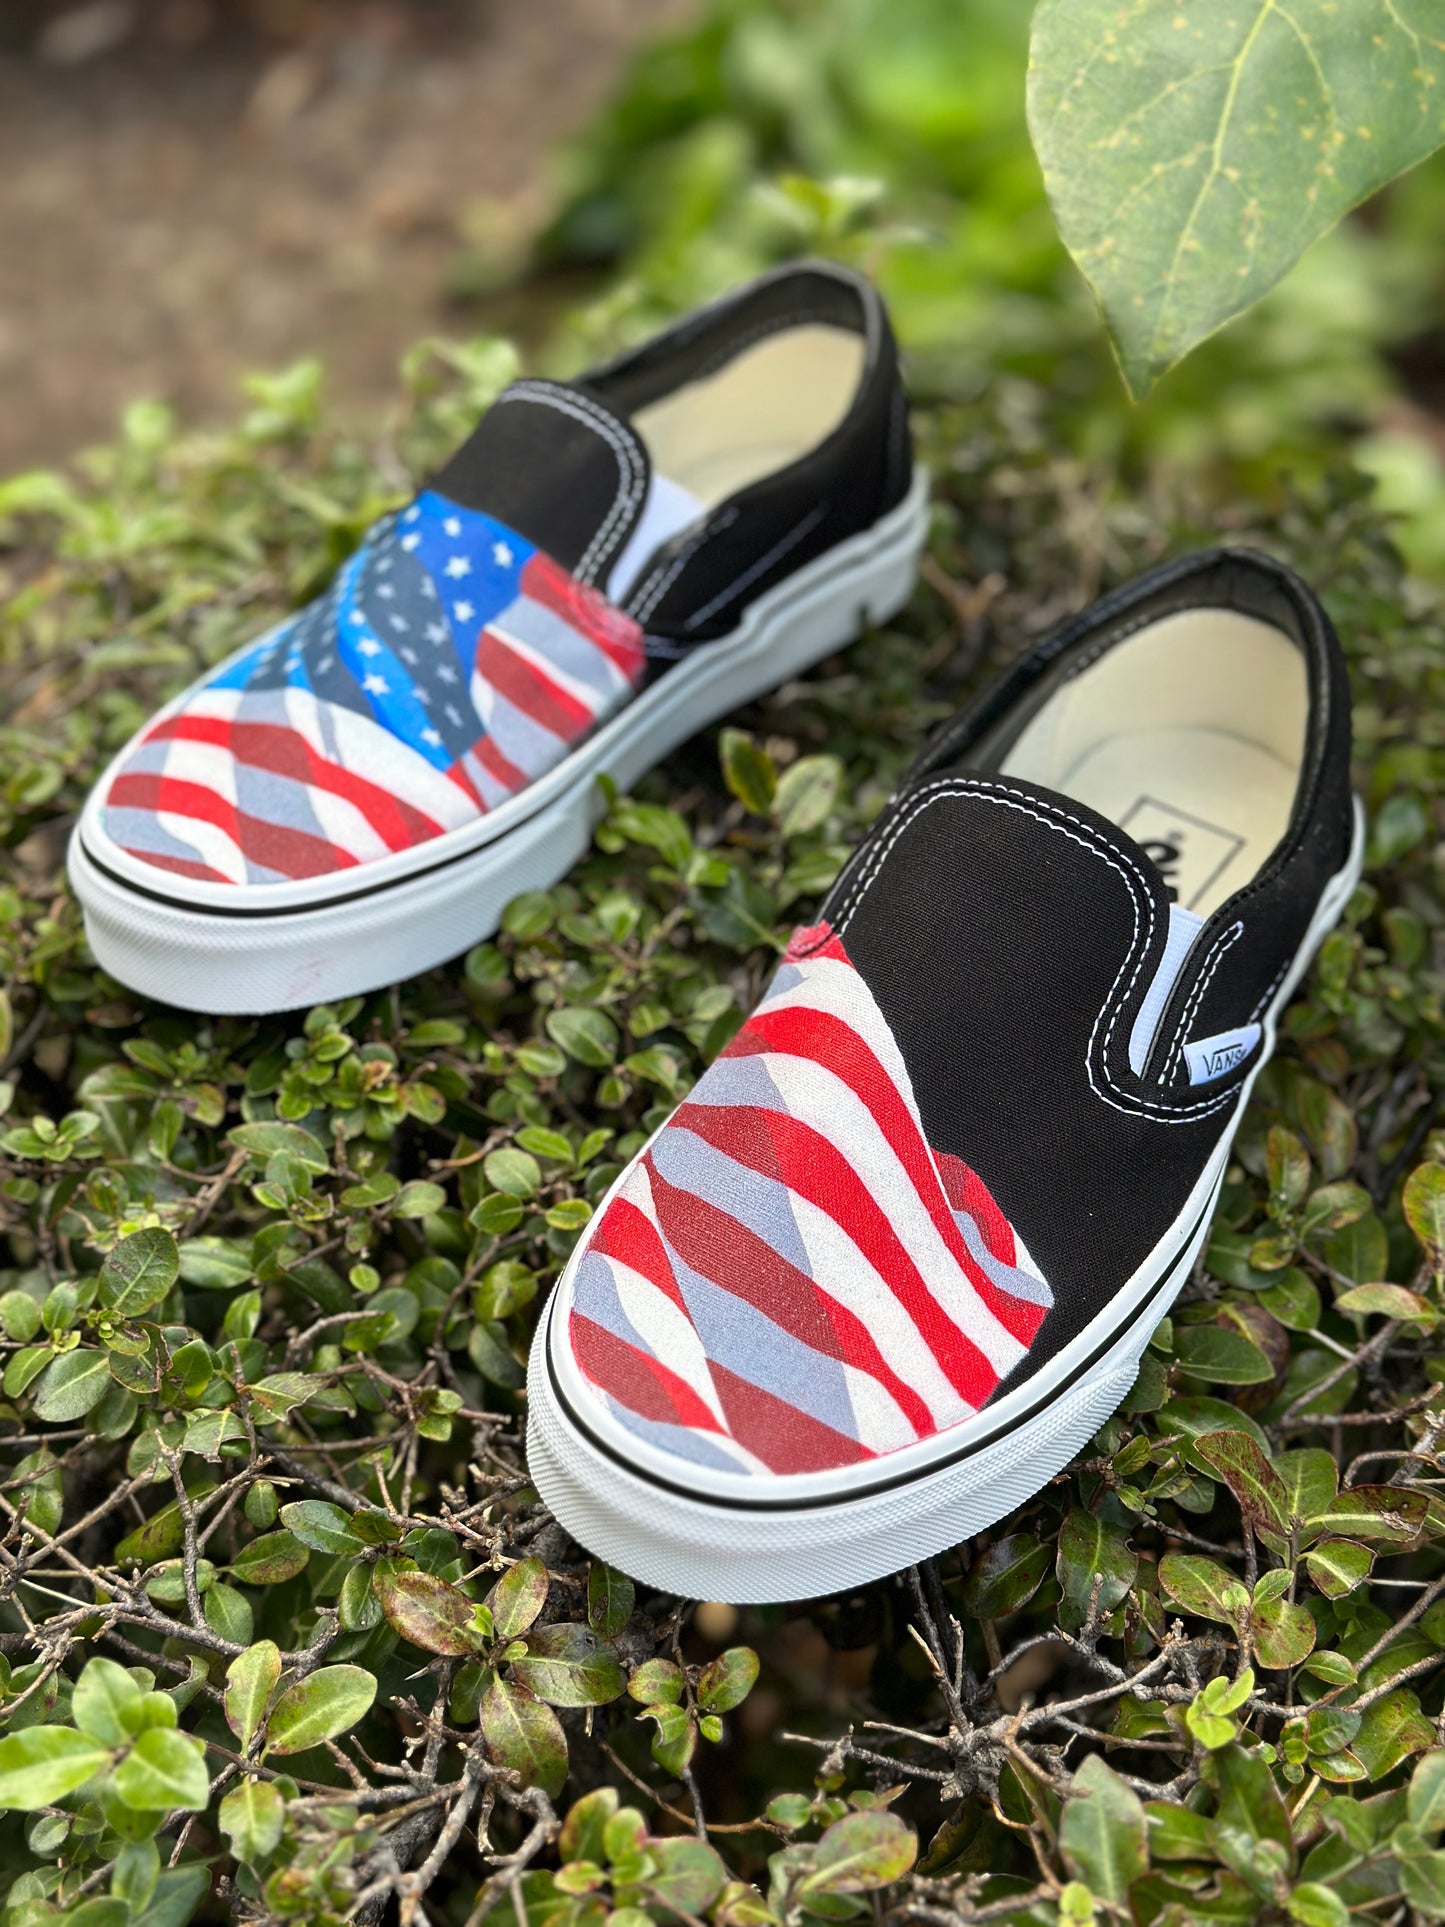 Black Slip On Vans Shoes for Men and Women Featuring American Flag Made in USA - Custom Vans Shoes